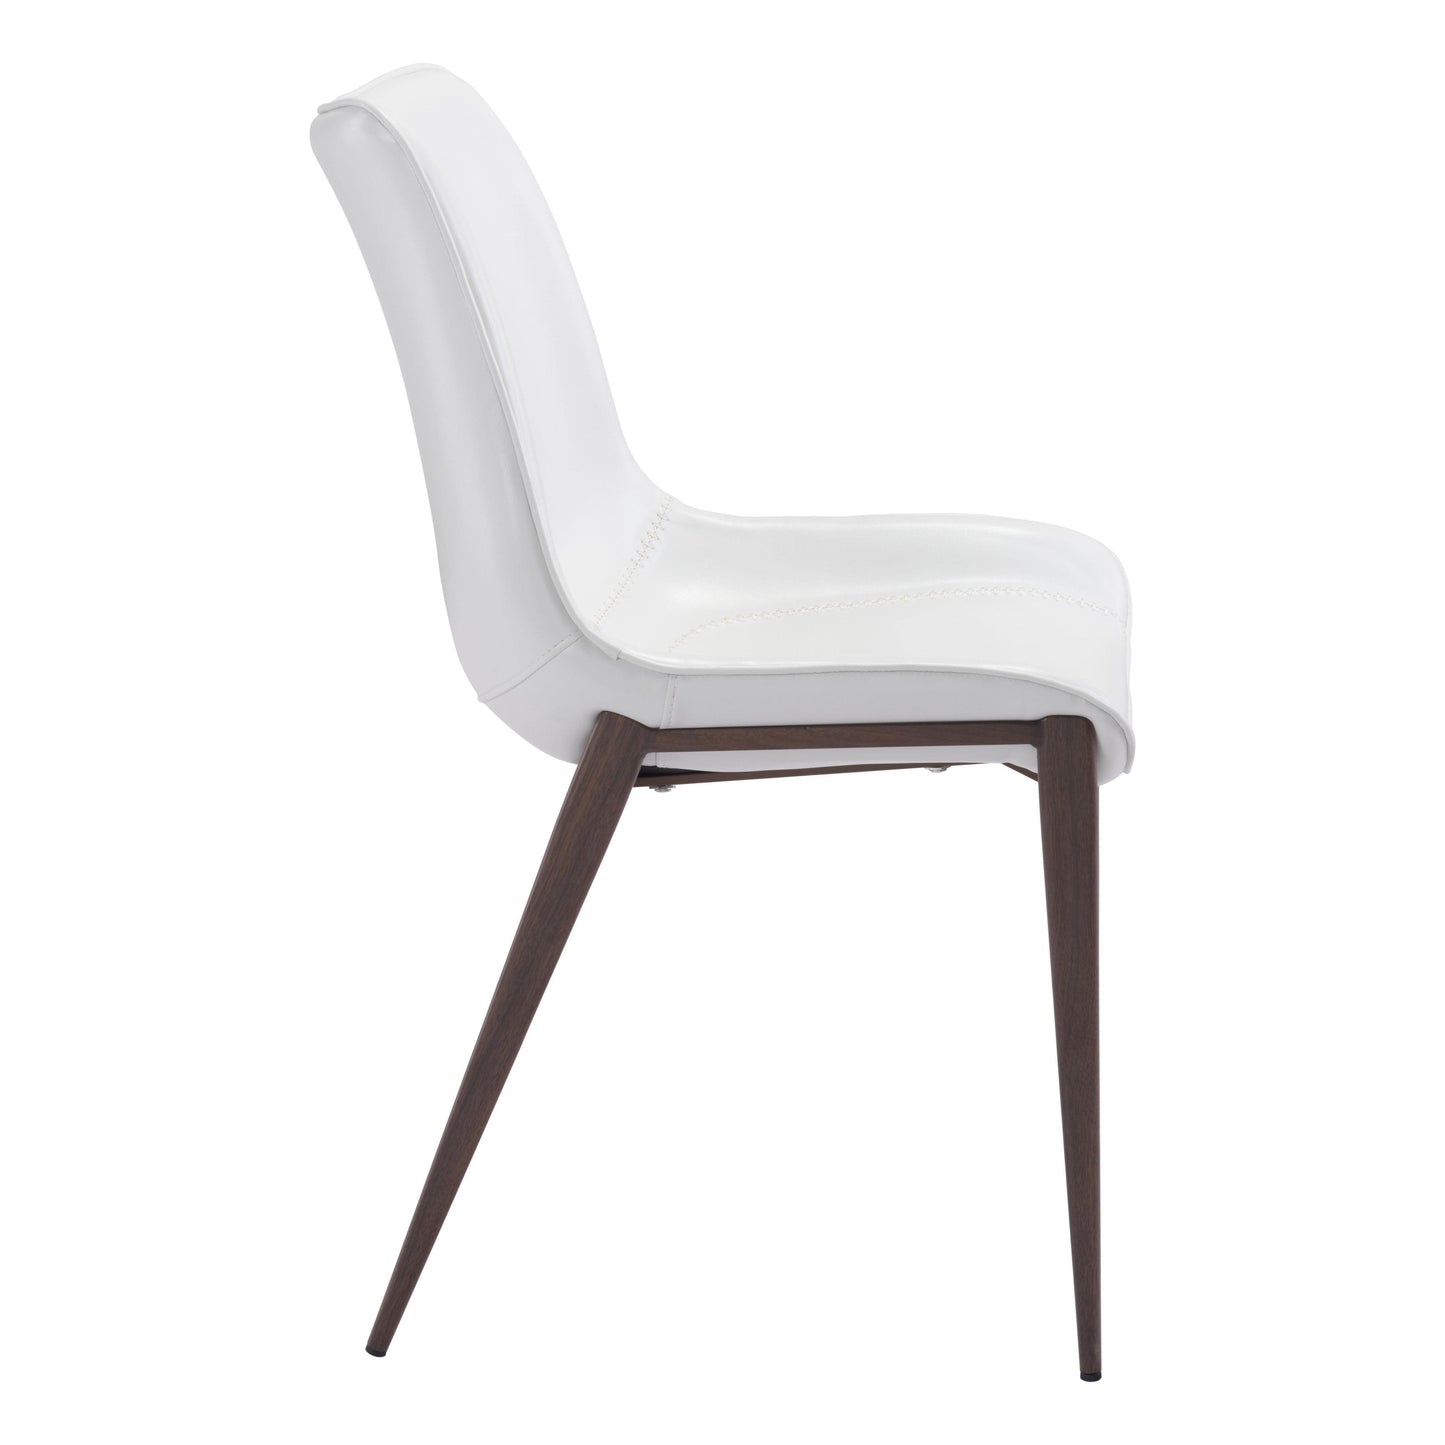 Magnus Dining Chair (Set of 2) White & Walnut - Sideboards and Things Back Type_Full Back, Back Type_With Back, Brand_Zuo Modern, Color_Brown, Color_White, Depth_20-30, Finish_Powder Coated, Height_30-40, Materials_Metal, Materials_Upholstery, Metal Type_Steel, Number of Pieces_2PC Set, Product Type_Dining Height, Shape_Armless, Upholstery Type_Leather, Upholstery Type_Vegan Leather, Width_20-30